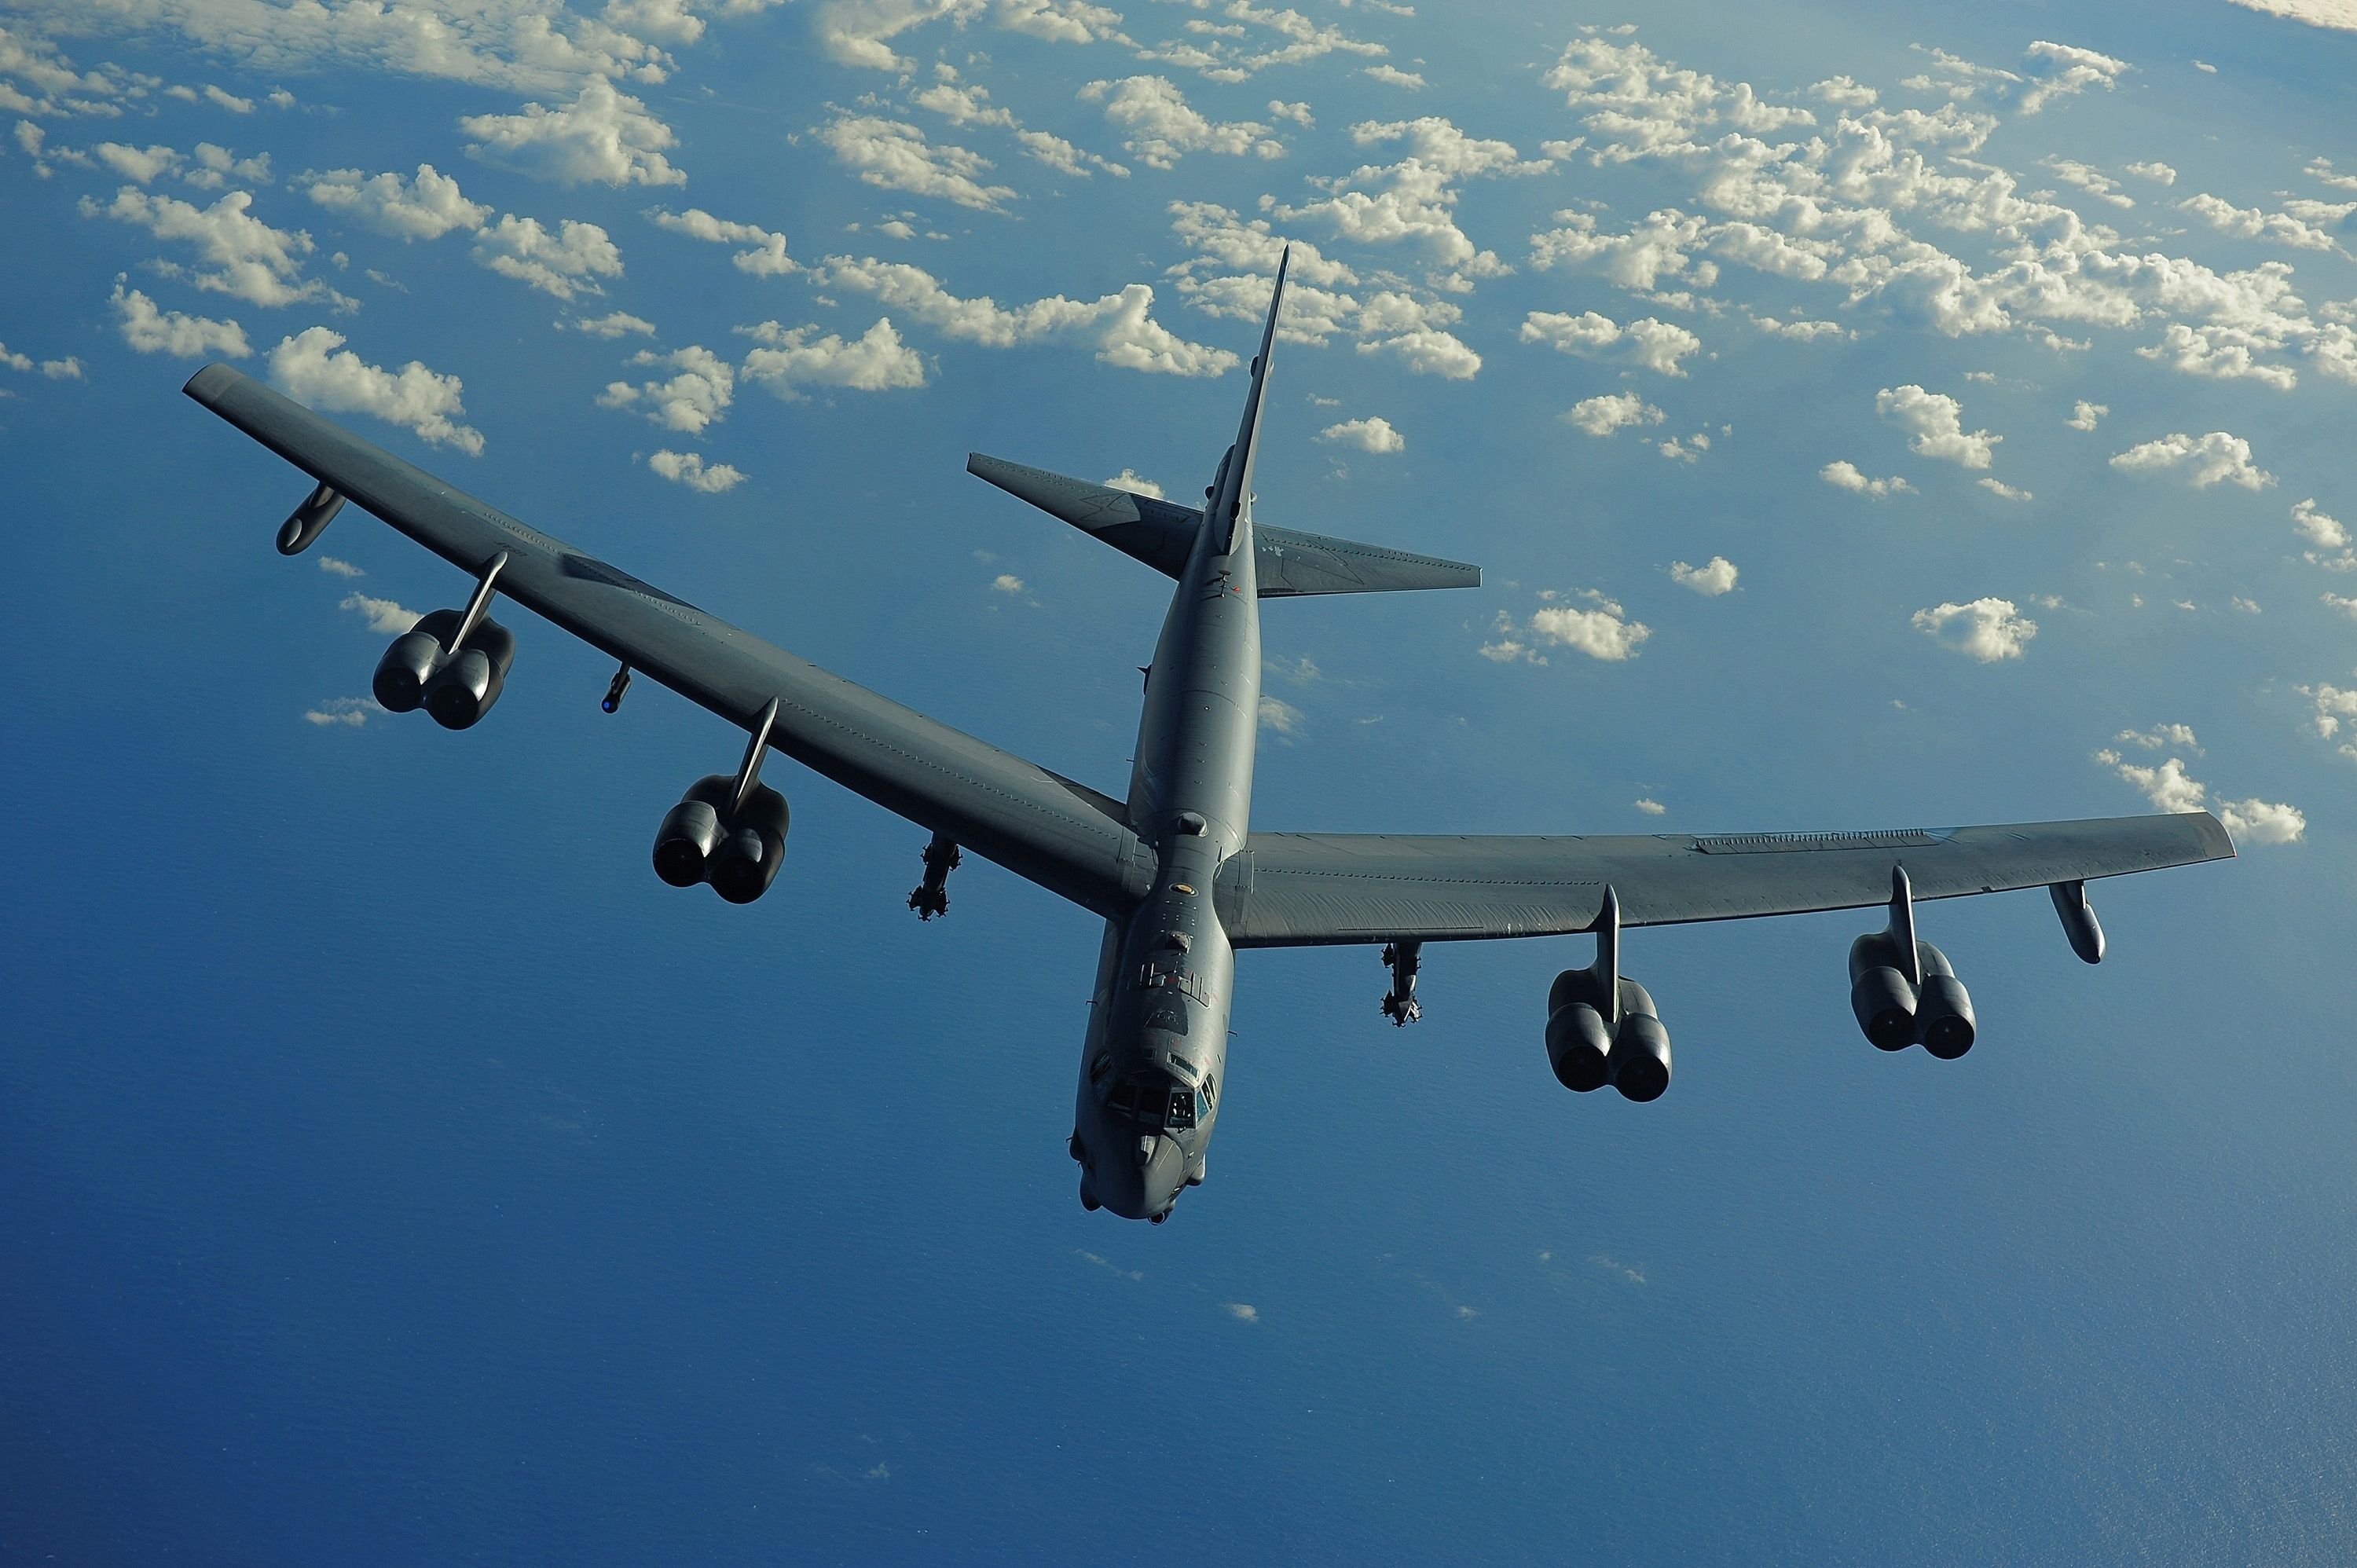 A B-52 flying over water.